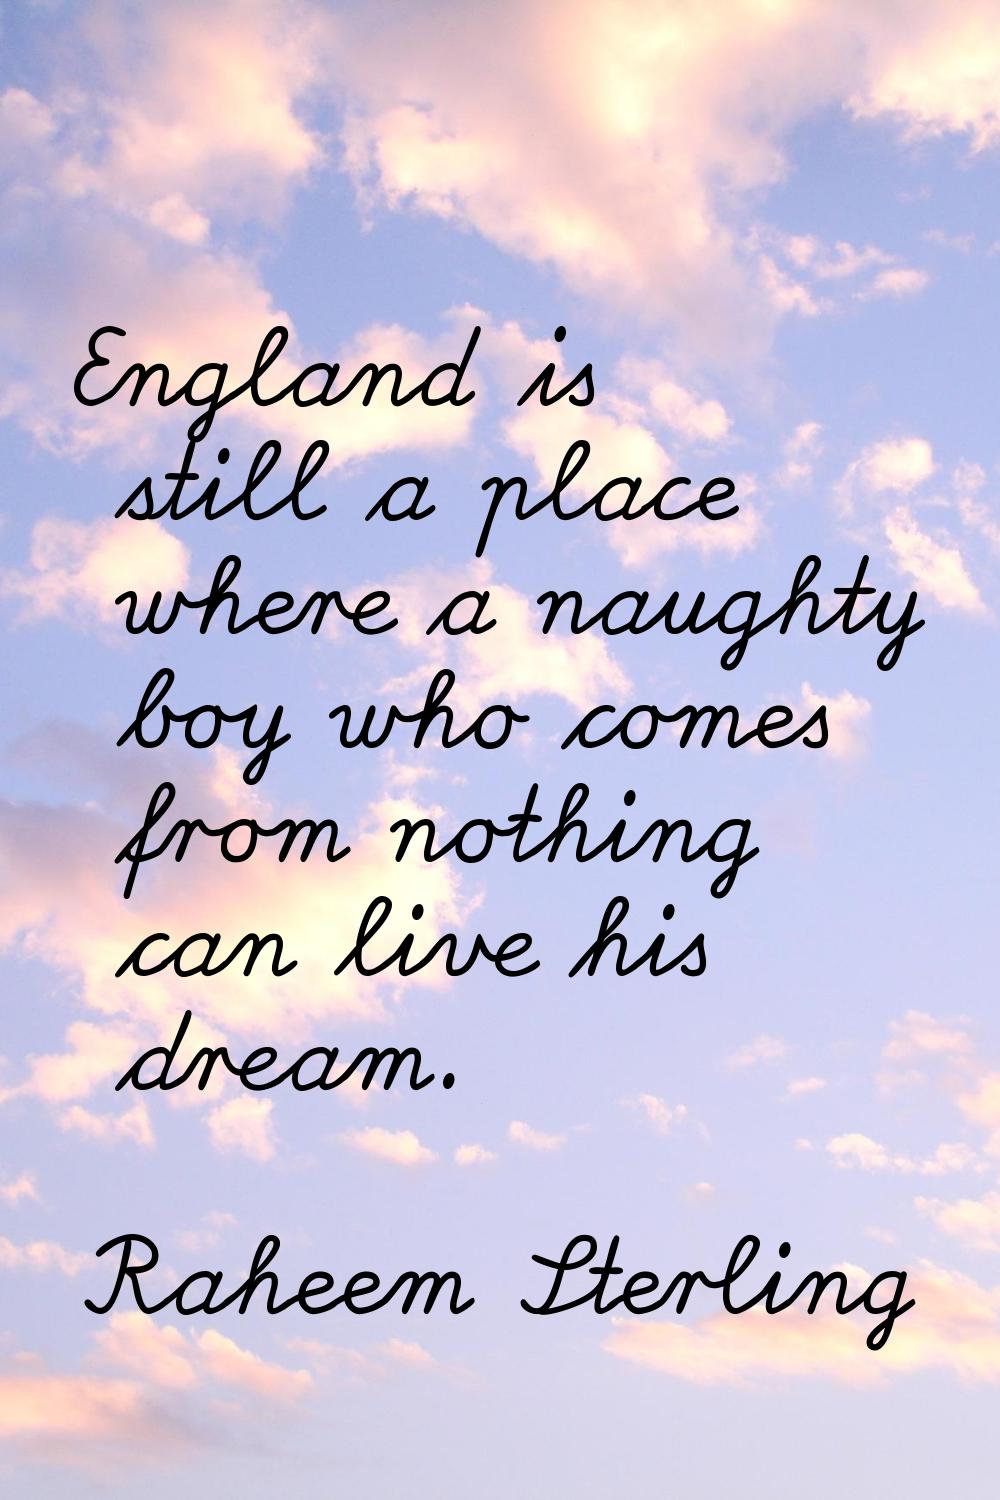 England is still a place where a naughty boy who comes from nothing can live his dream.